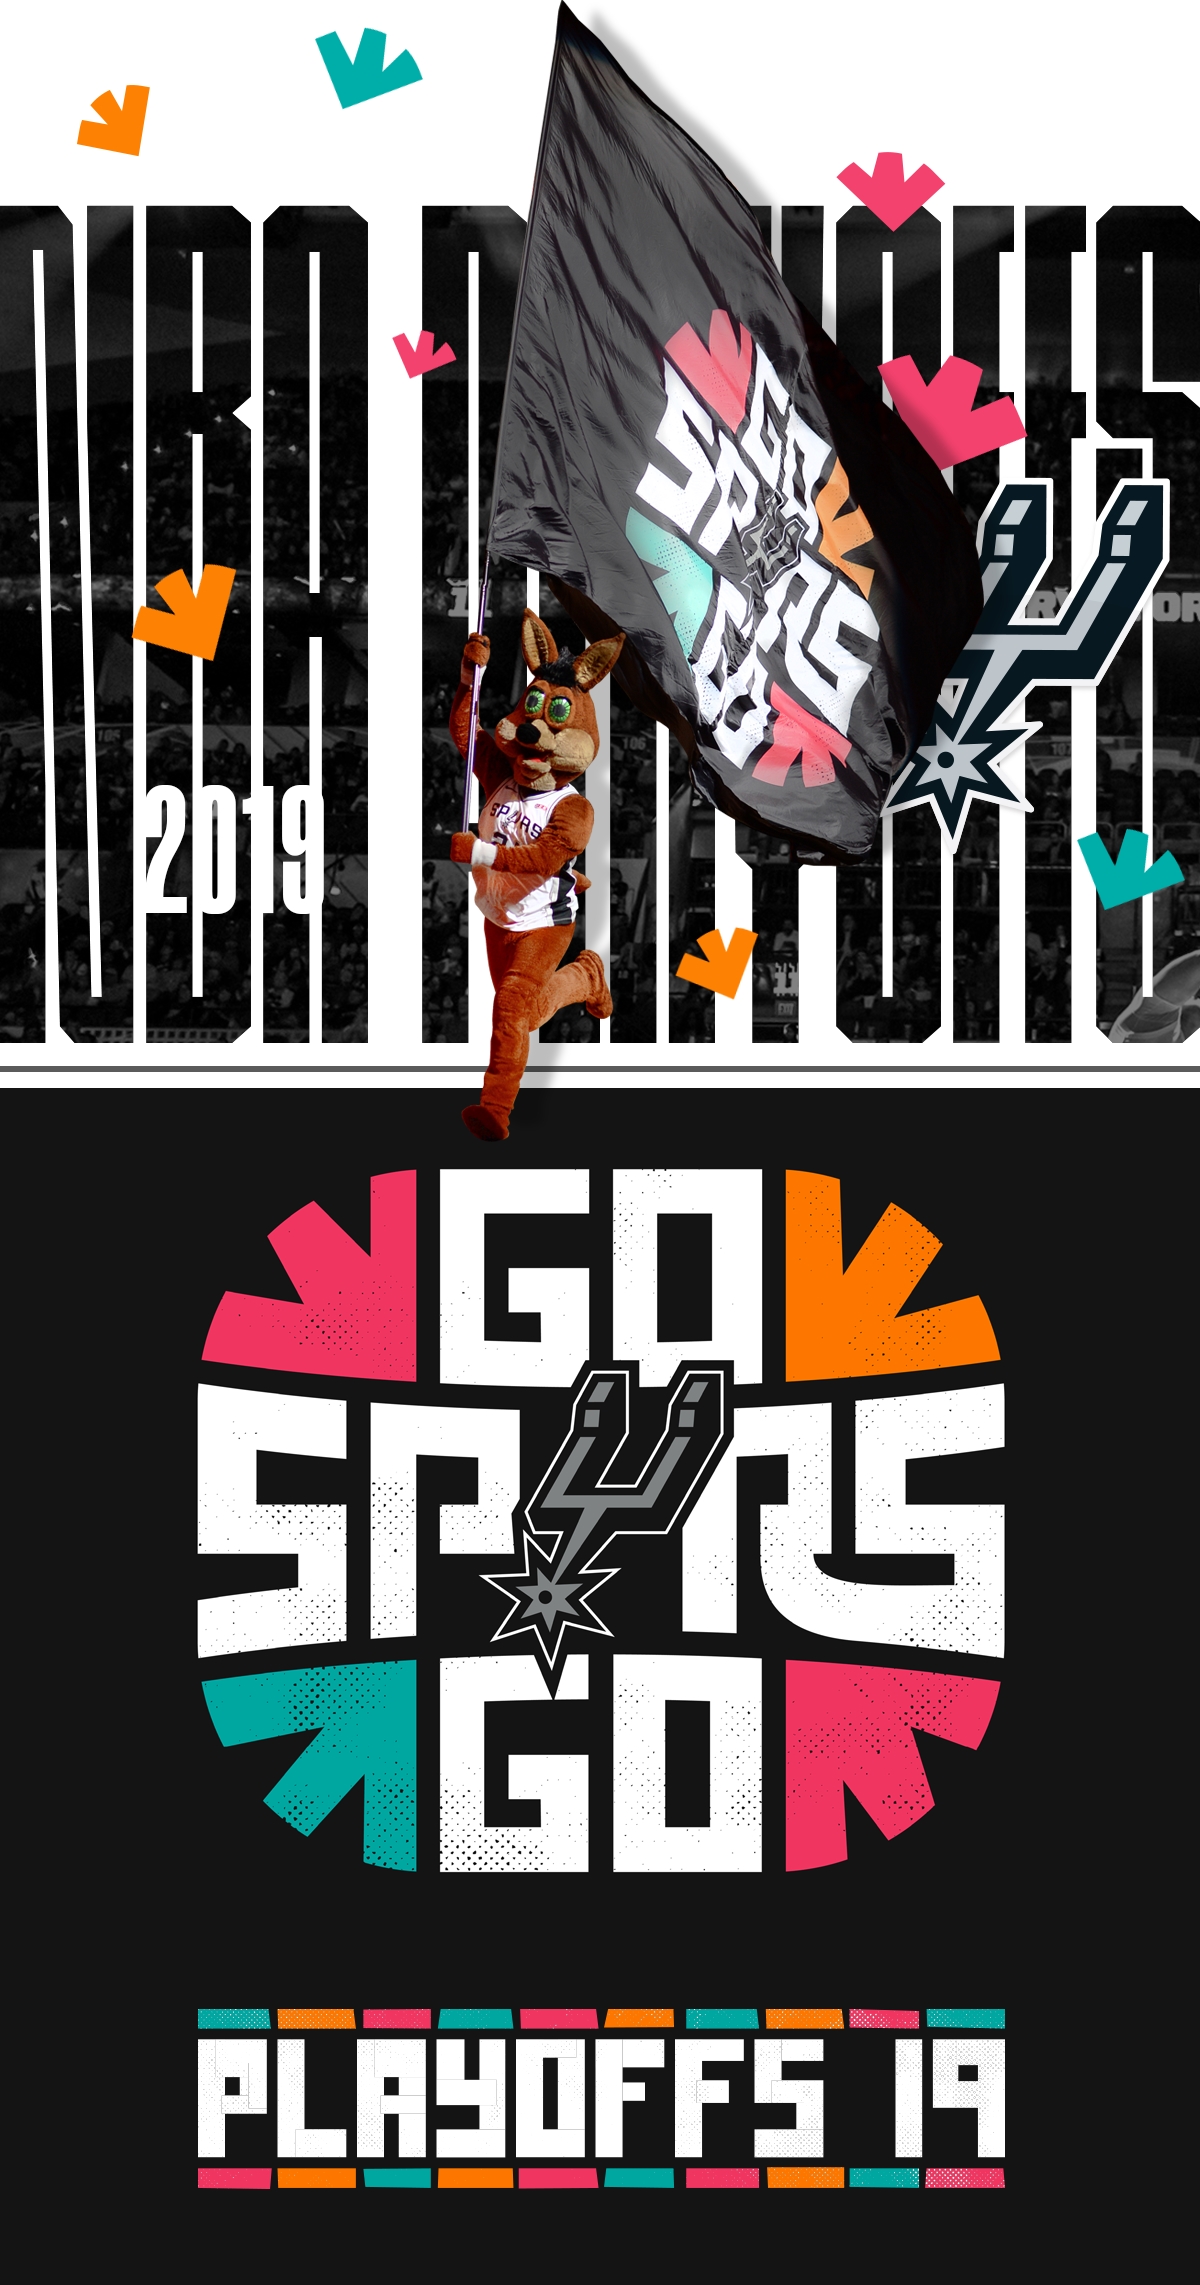 San Antonio Spurs 2018/19 Playoff Campaign by Creative Director Justin Winget